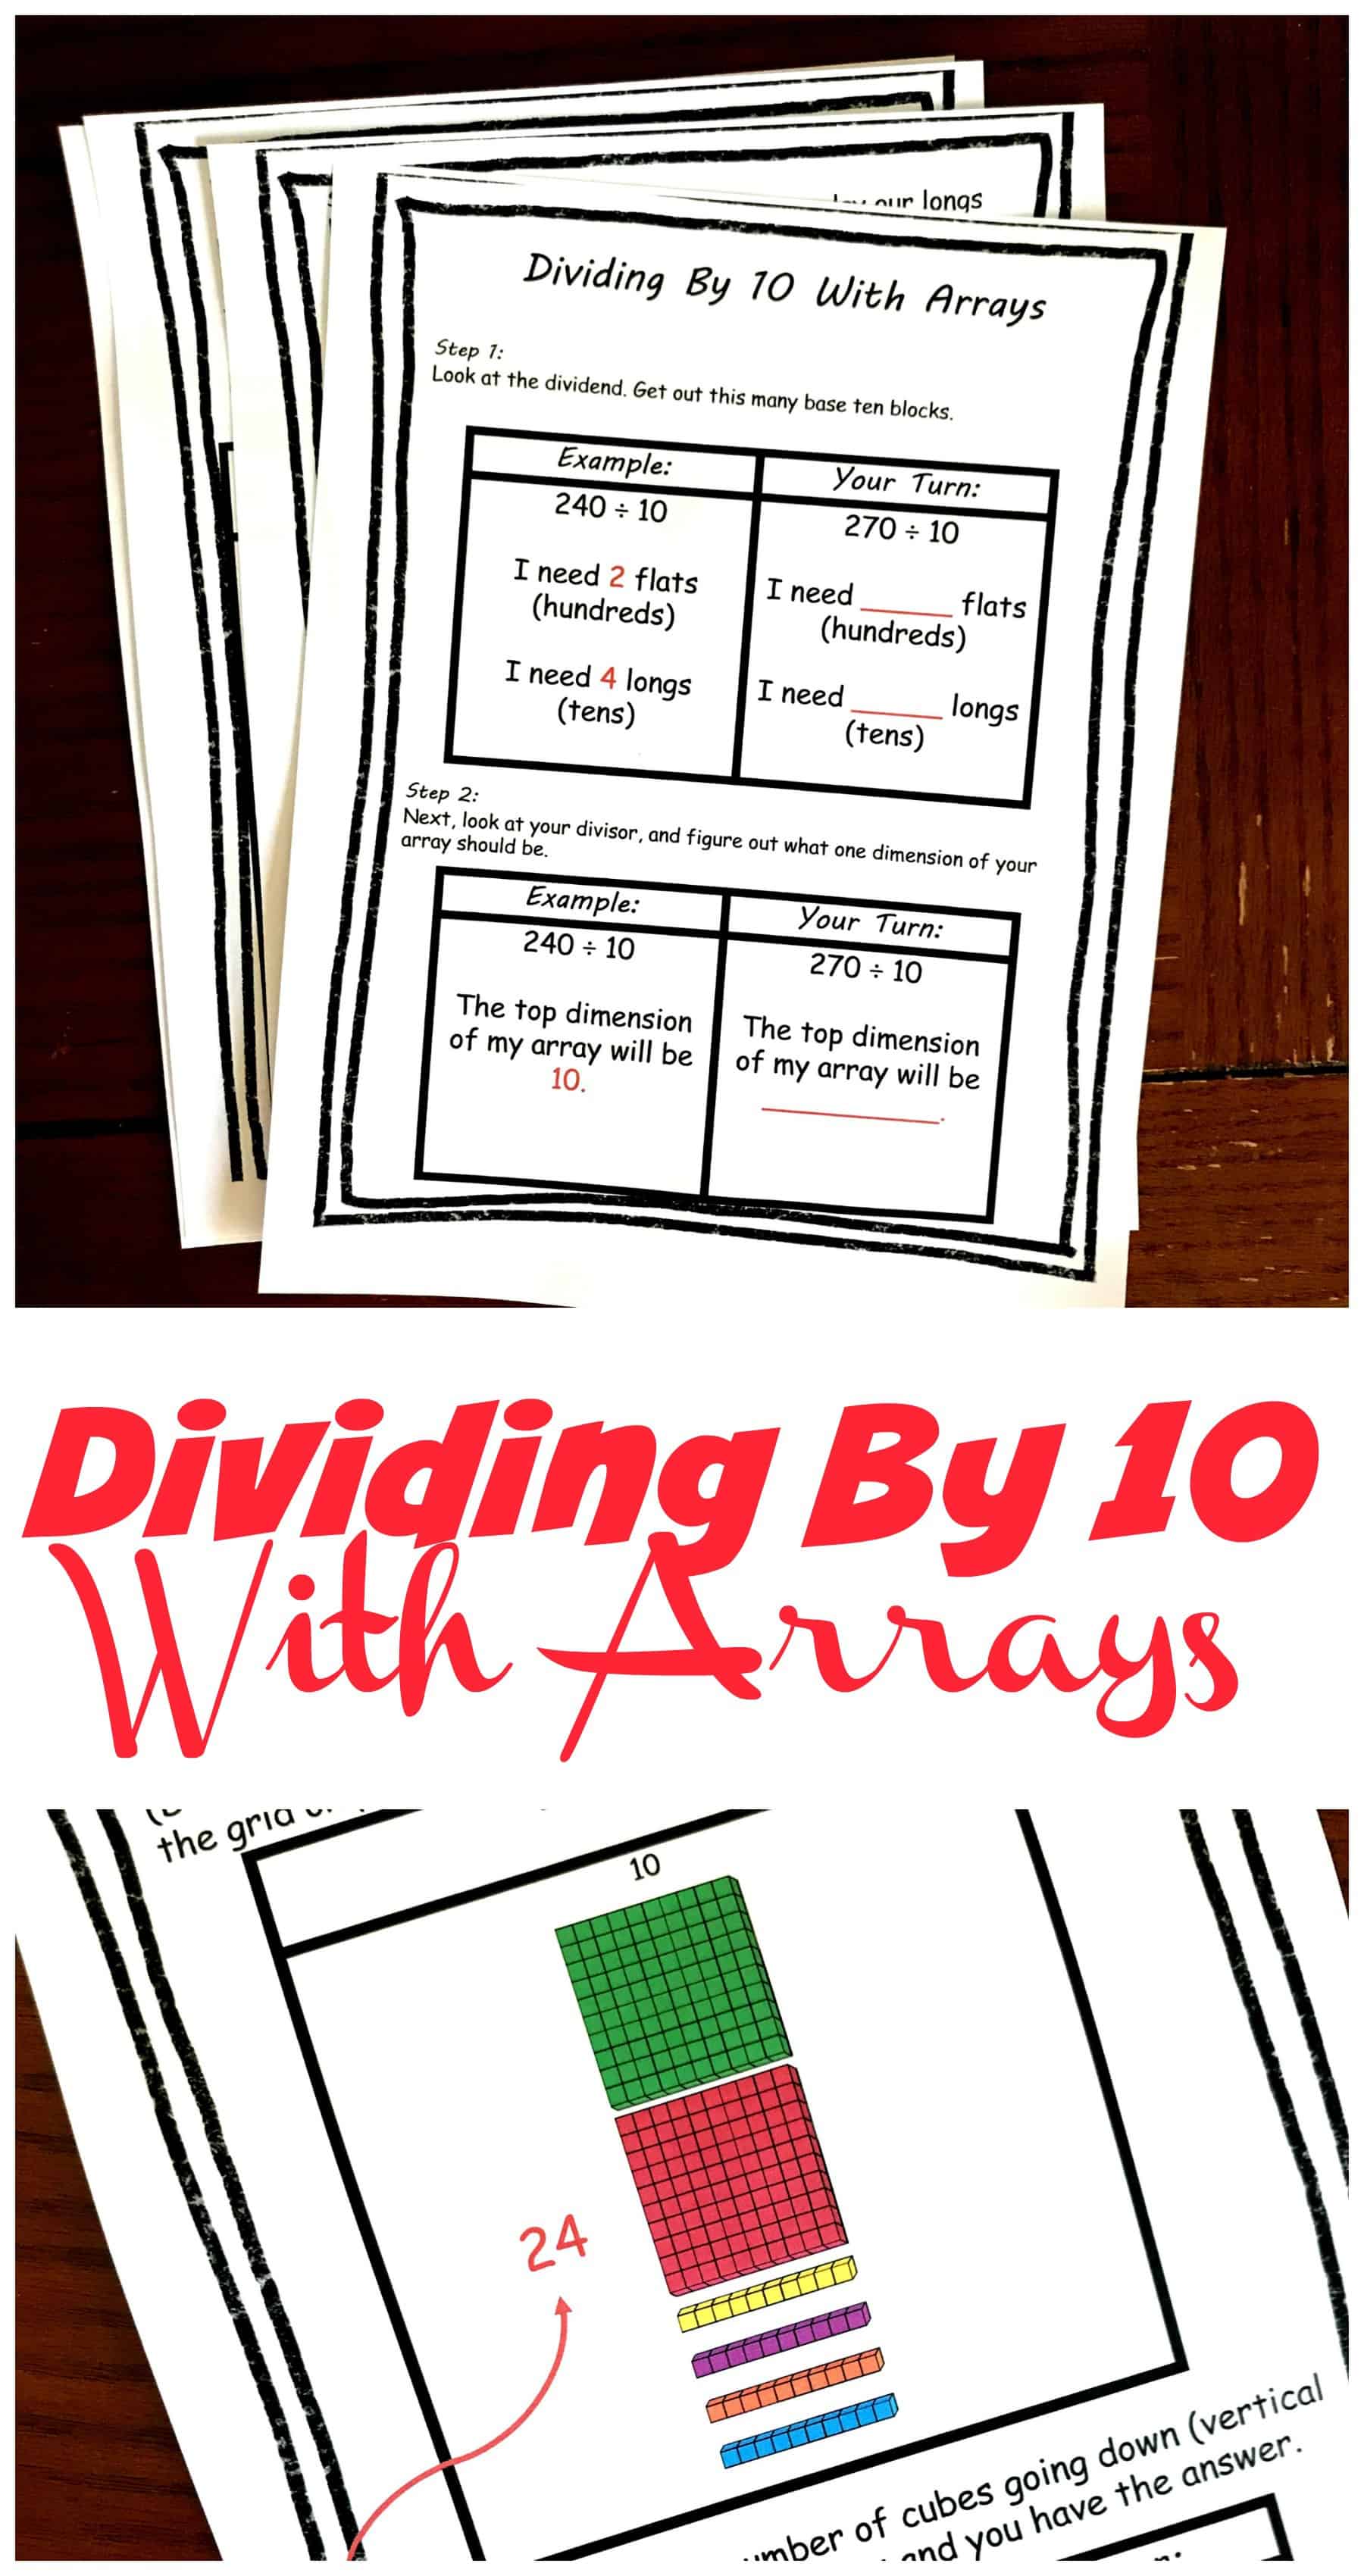 Grab these step by step directions for dividing by 10 using arrays. Children will learn how to use base ten blocks to create an array while dividing.